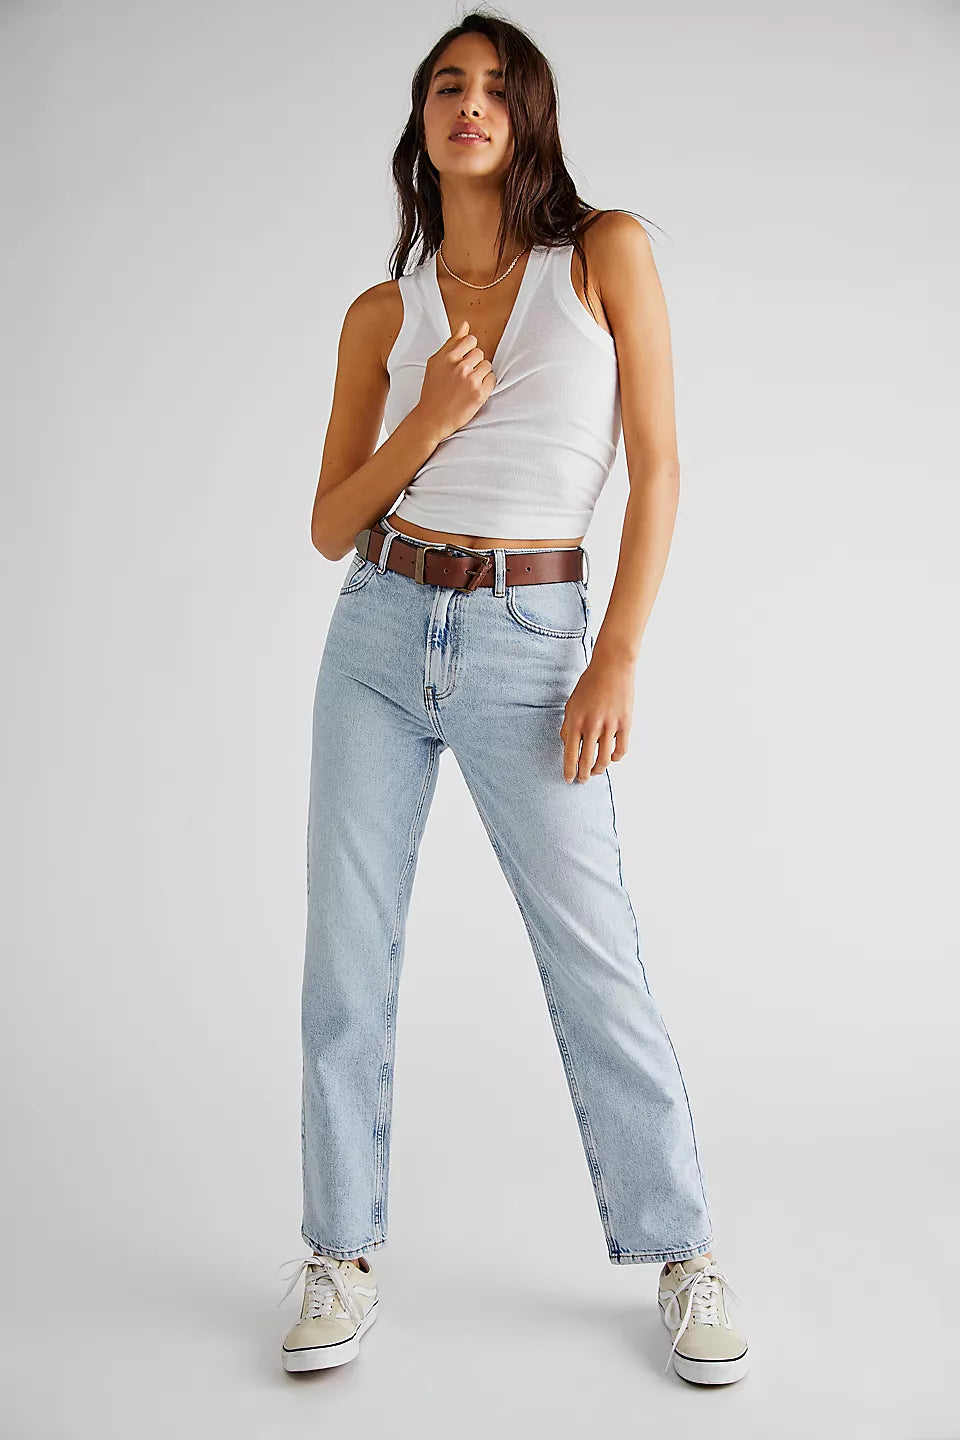 FREE PEOPLE PACIFICA STRAIGHT LEG BLEACH ACID WASH JEANS